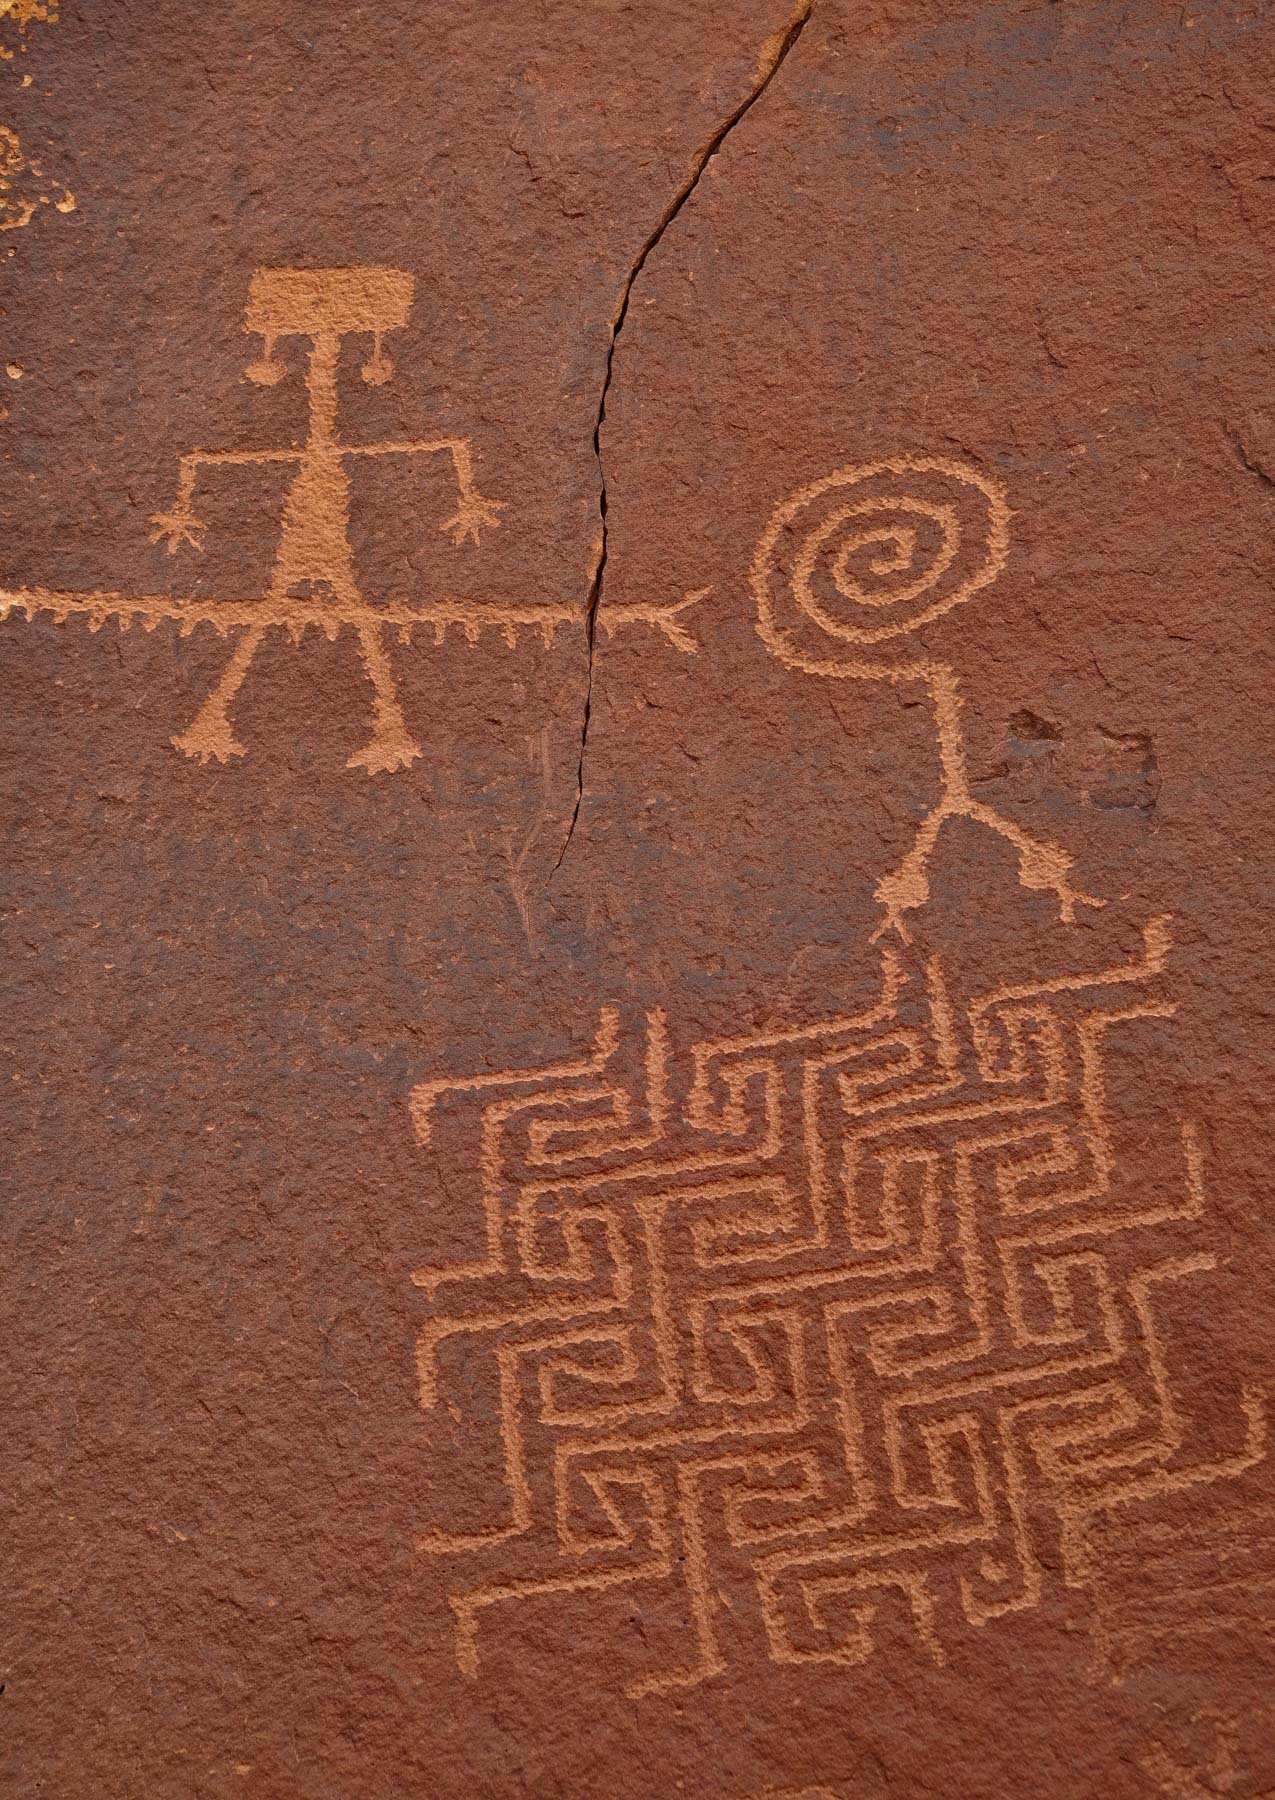 The Maze Petroglyph in Coyote Buttes North